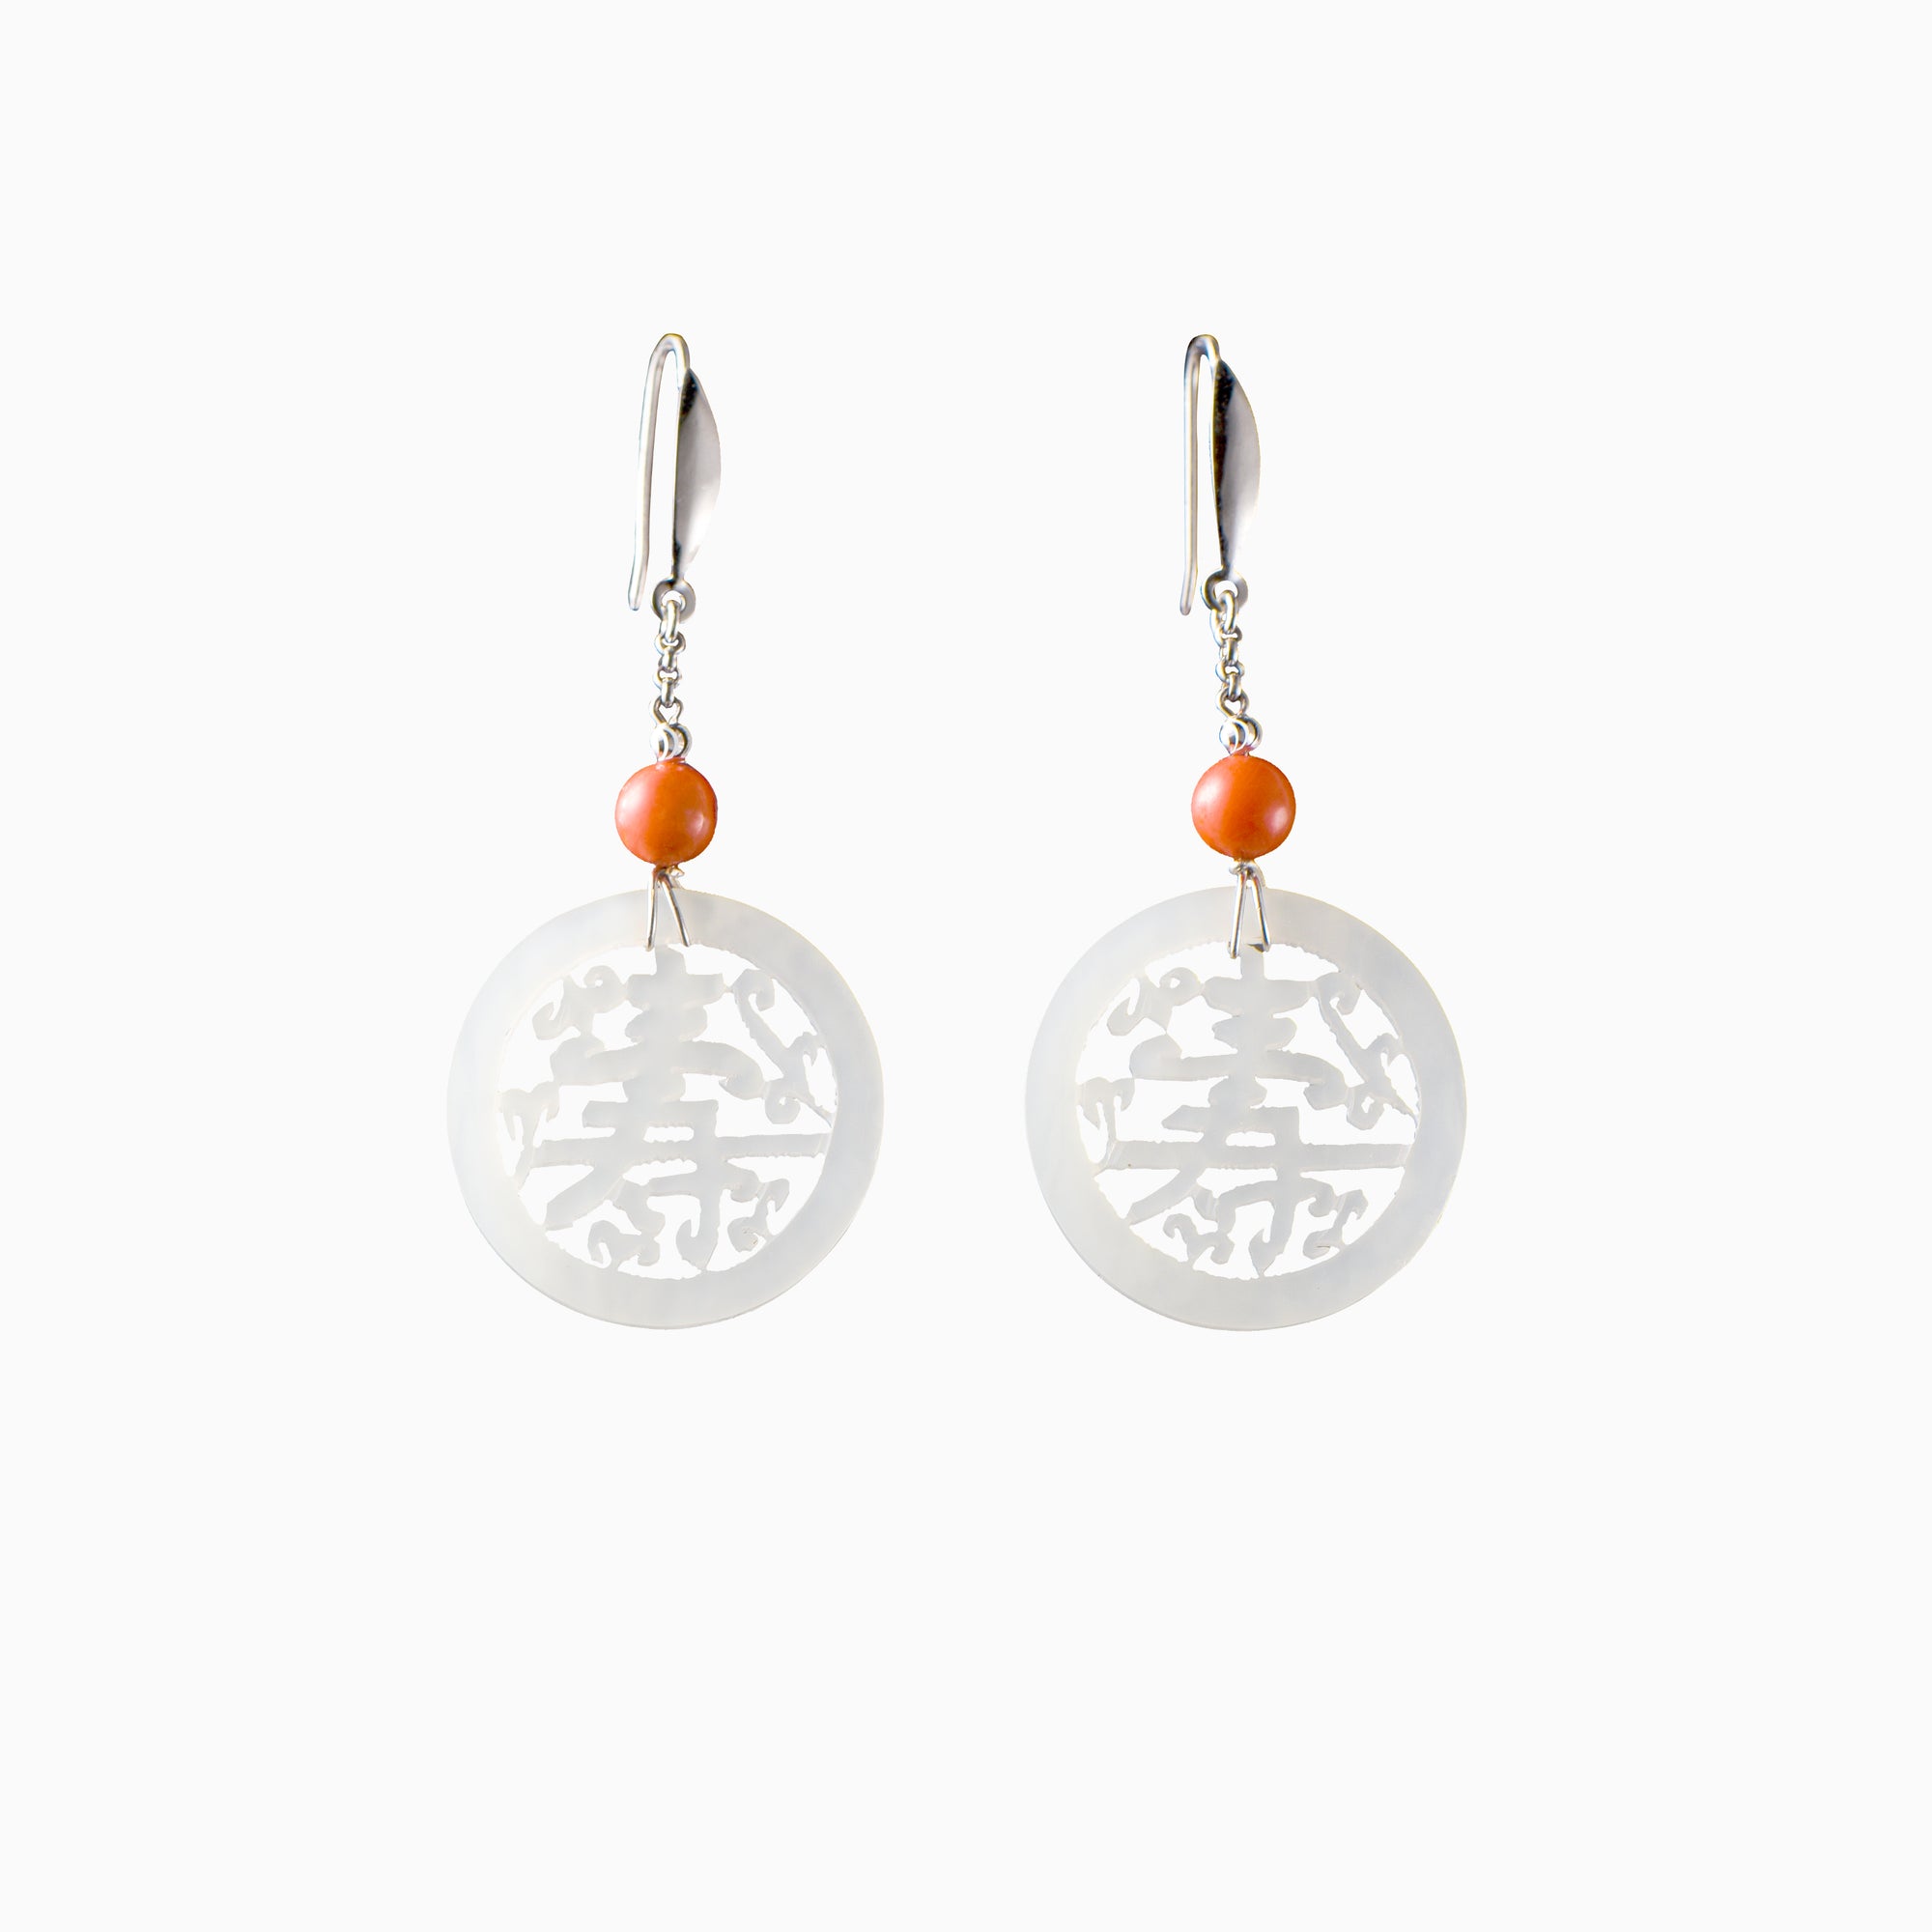 White jade earrings designed with the Chinese character for longevity